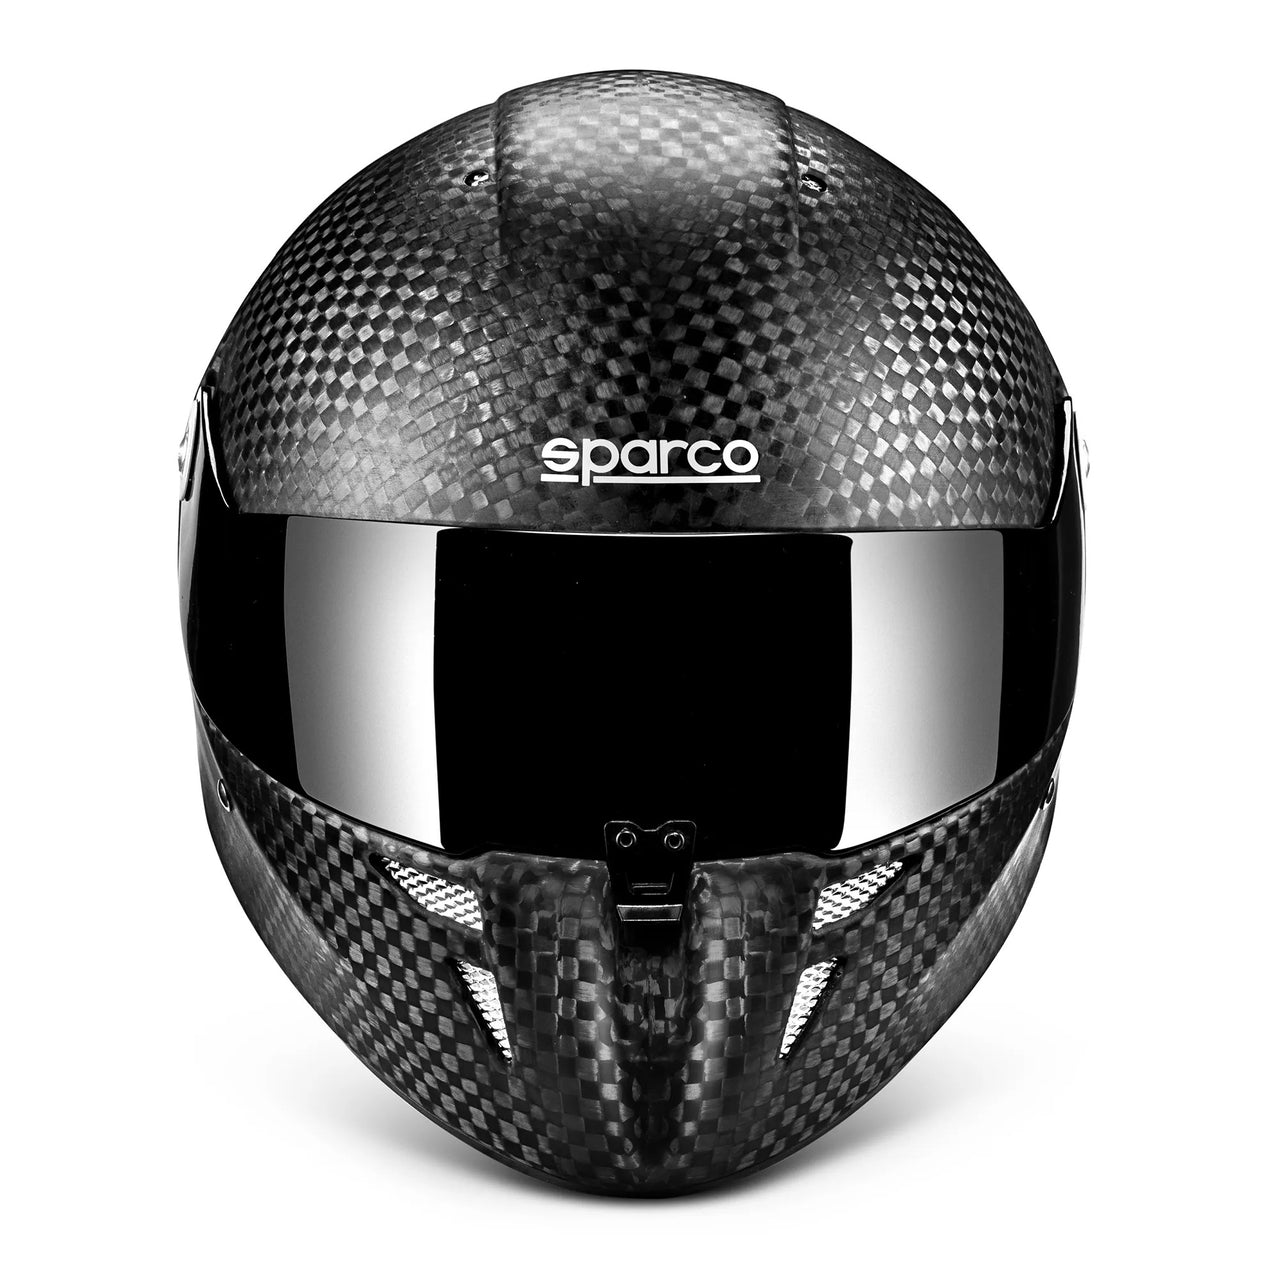 Sparco Prime RF-10 8860 Supercarbon Helmet - Front View Image" Get a close look at the front view of the Sparco Prime RF-10 8860 Supercarbon Carbon Fiber Helmet in this image, showcasing its cutting-edge design.